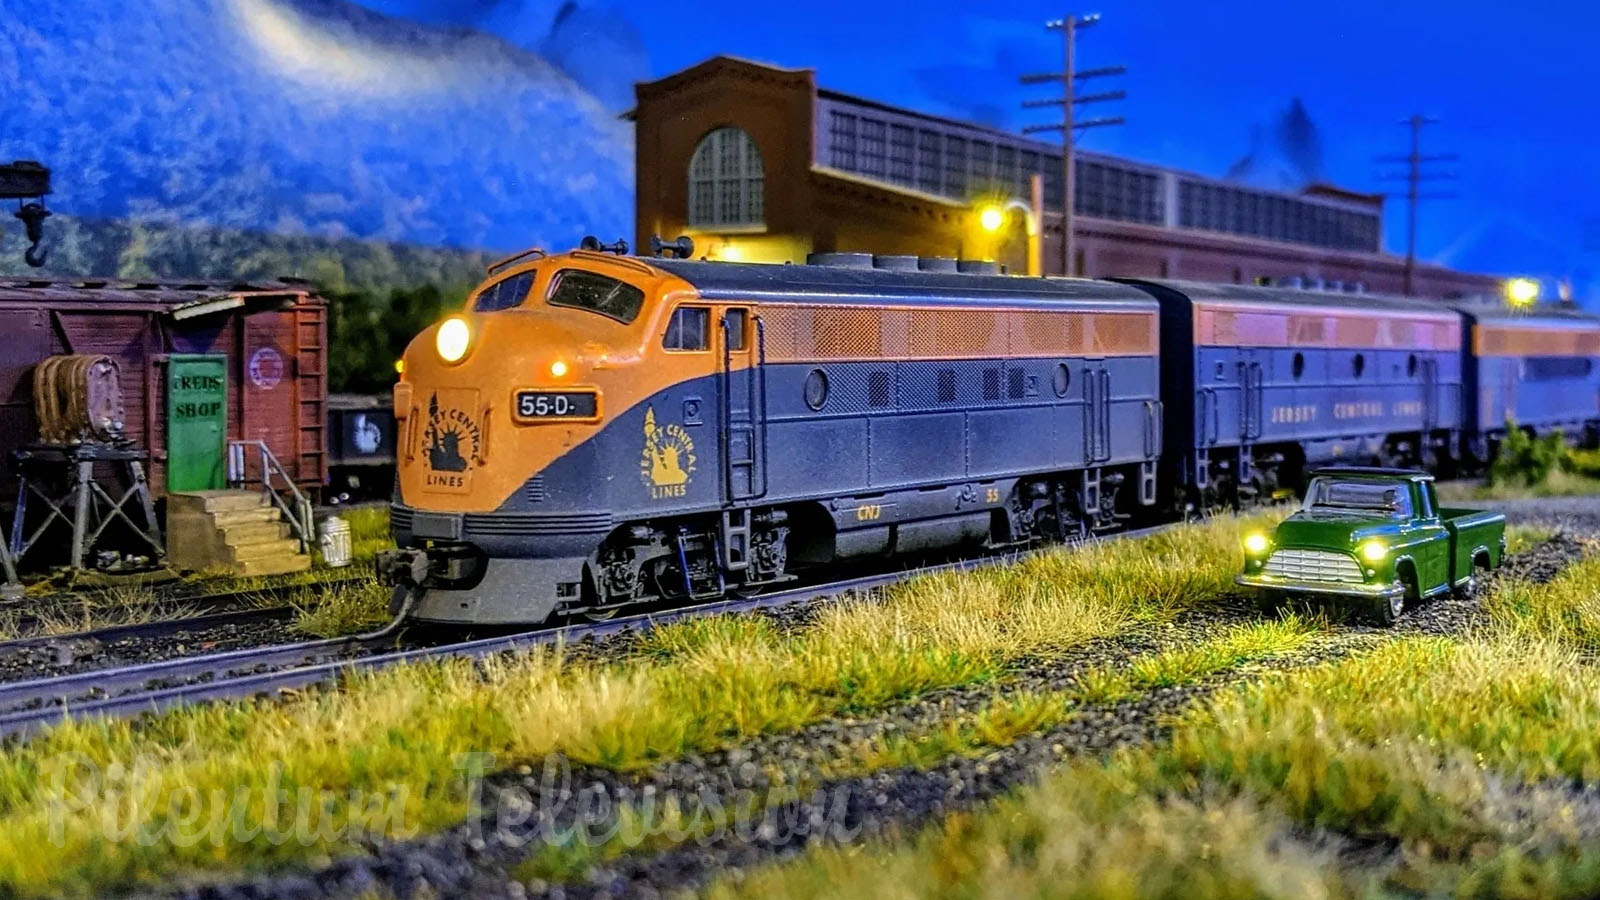 One of the largest model railroad HO scale layouts in the United States: The Lehigh & Keystone Valley Museum